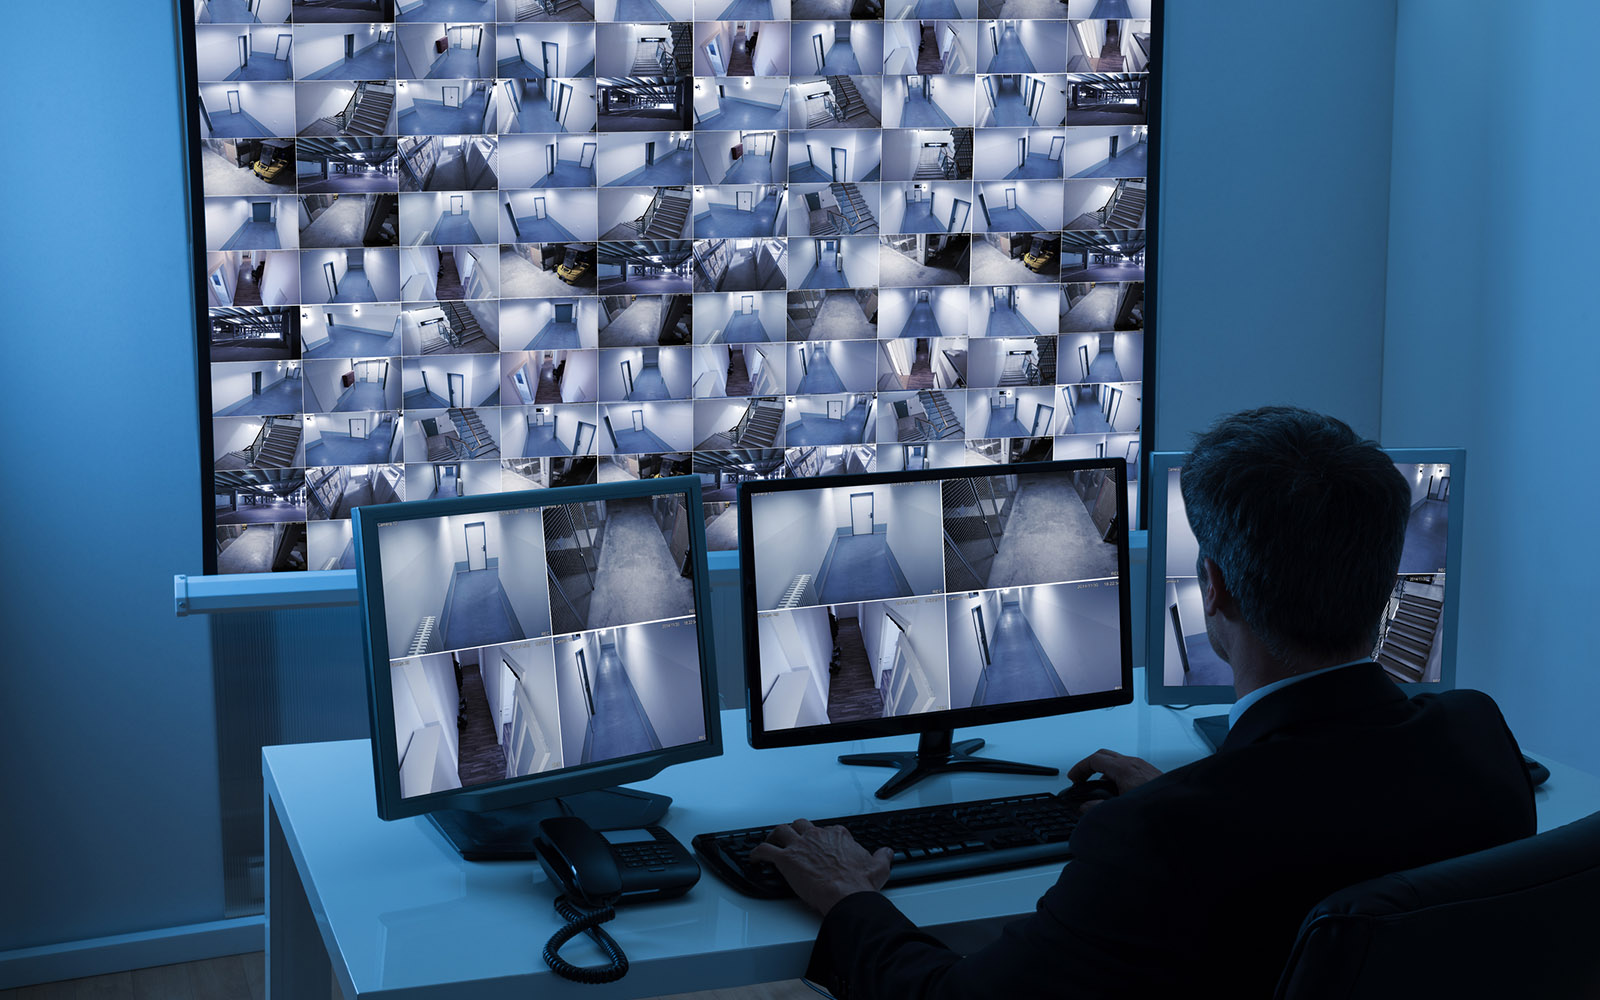 Man In Control Room Monitoring Cctv Footage